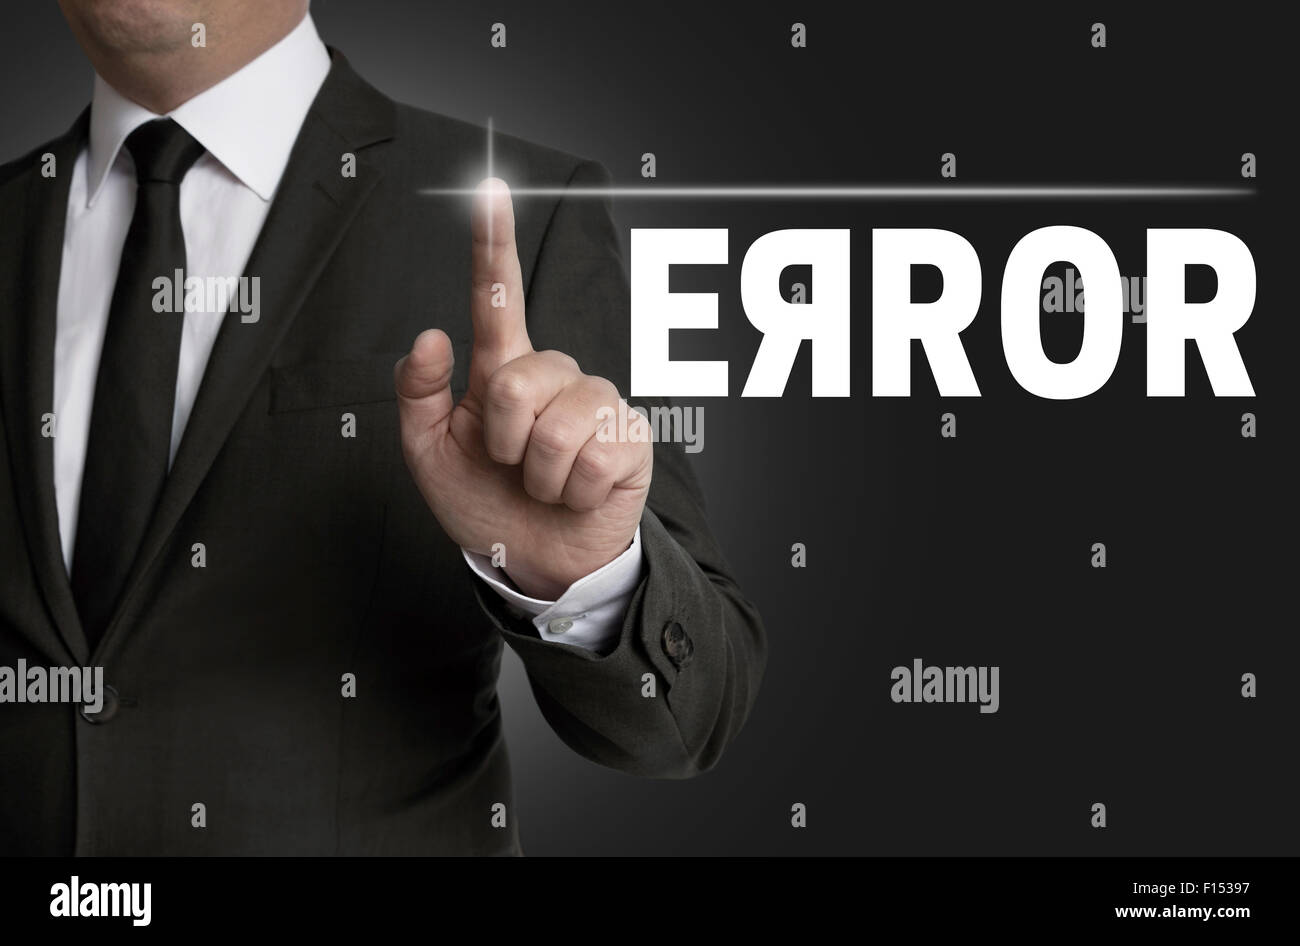 error touchscreen is operated by businessman concept. Stock Photo